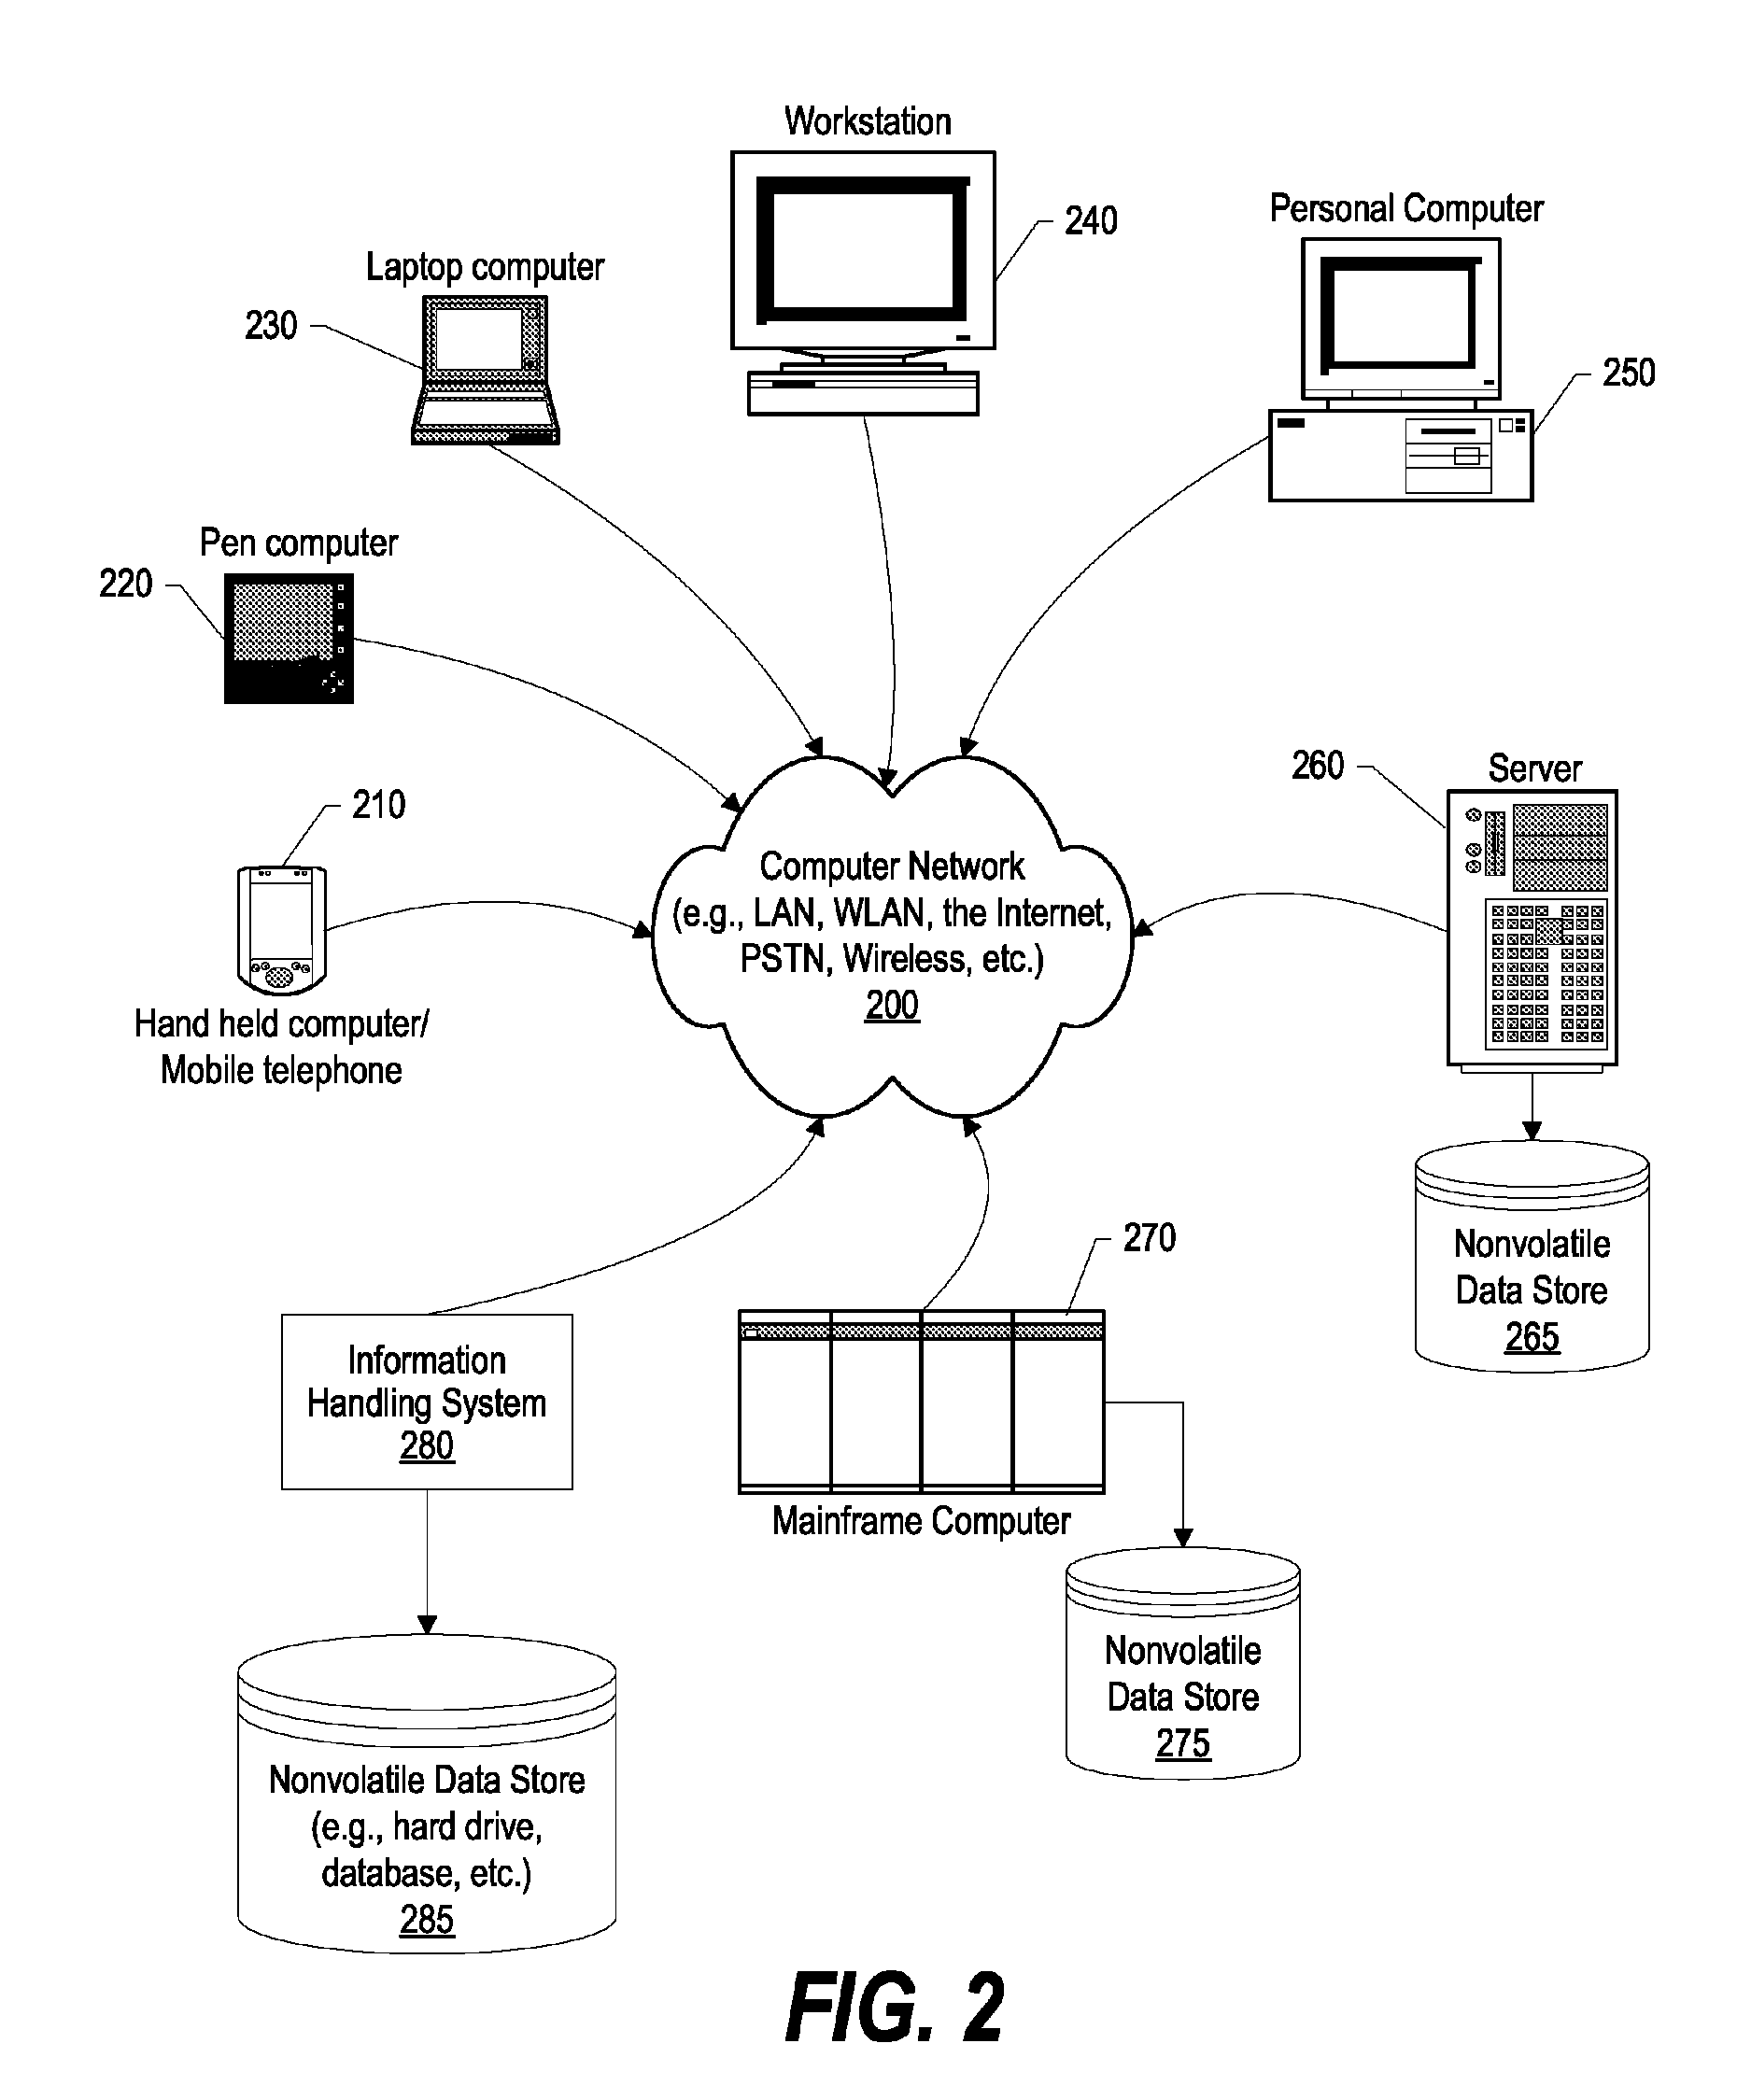 System and method for using remote module on VIOS to manage backups to remote backup servers